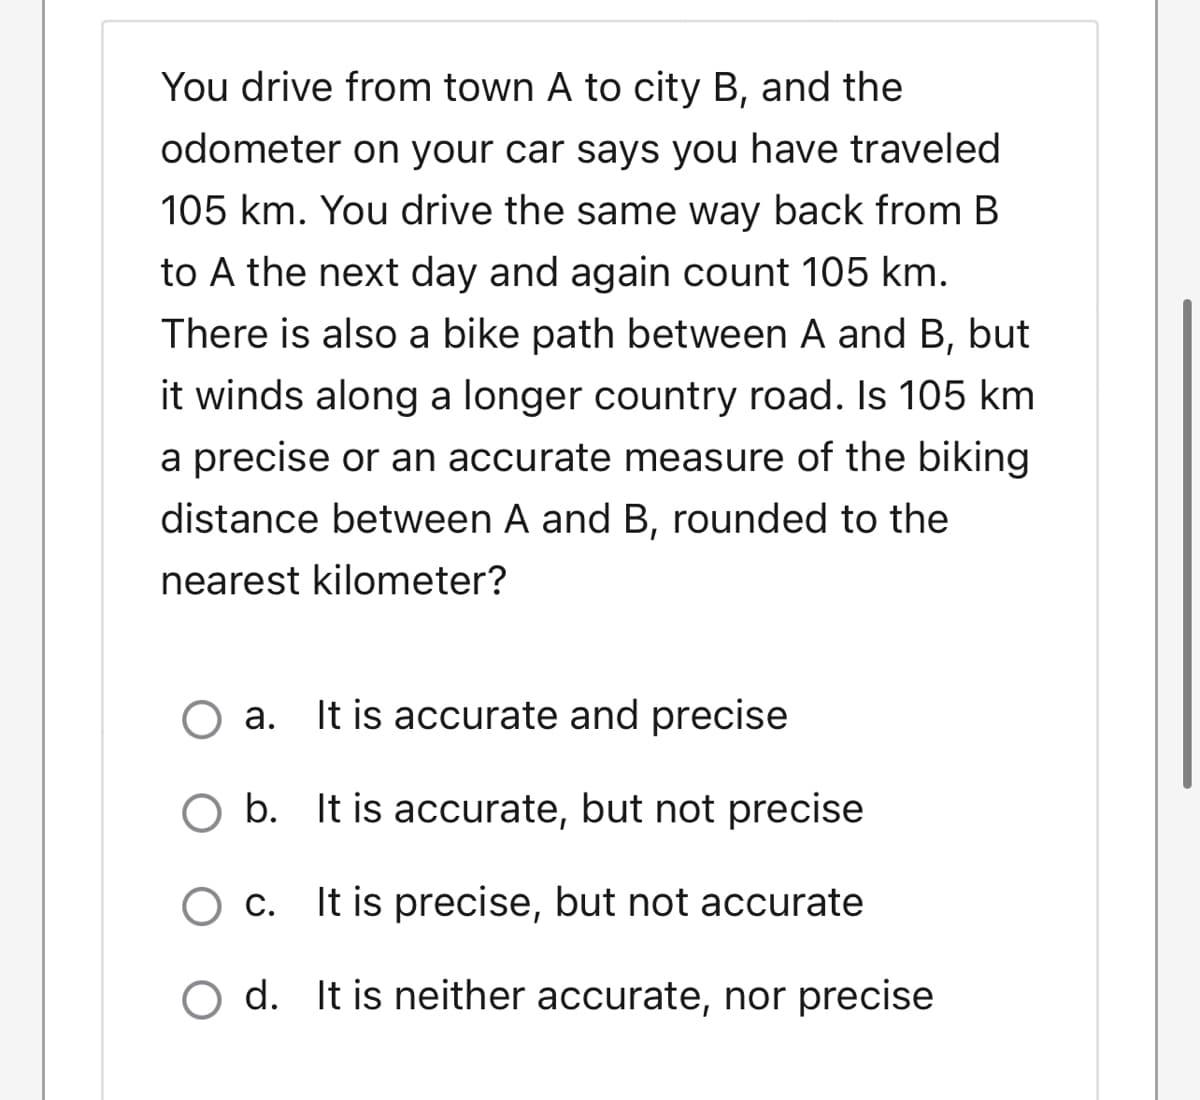 You drive from town A to city B, and the
odometer on your car says you have traveled
105 km. You drive the same way back from B
to A the next day and again count 105 km.
There is also a bike path between A and B, but
it winds along a longer country road. Is 105 km
a precise or an accurate measure of the biking
distance between A and B, rounded to the
nearest kilometer?
O a. It is accurate and precise
а.
O b. It is accurate, but not precise
С.
It is precise, but not accurate
O d. It is neither accurate, nor precise
